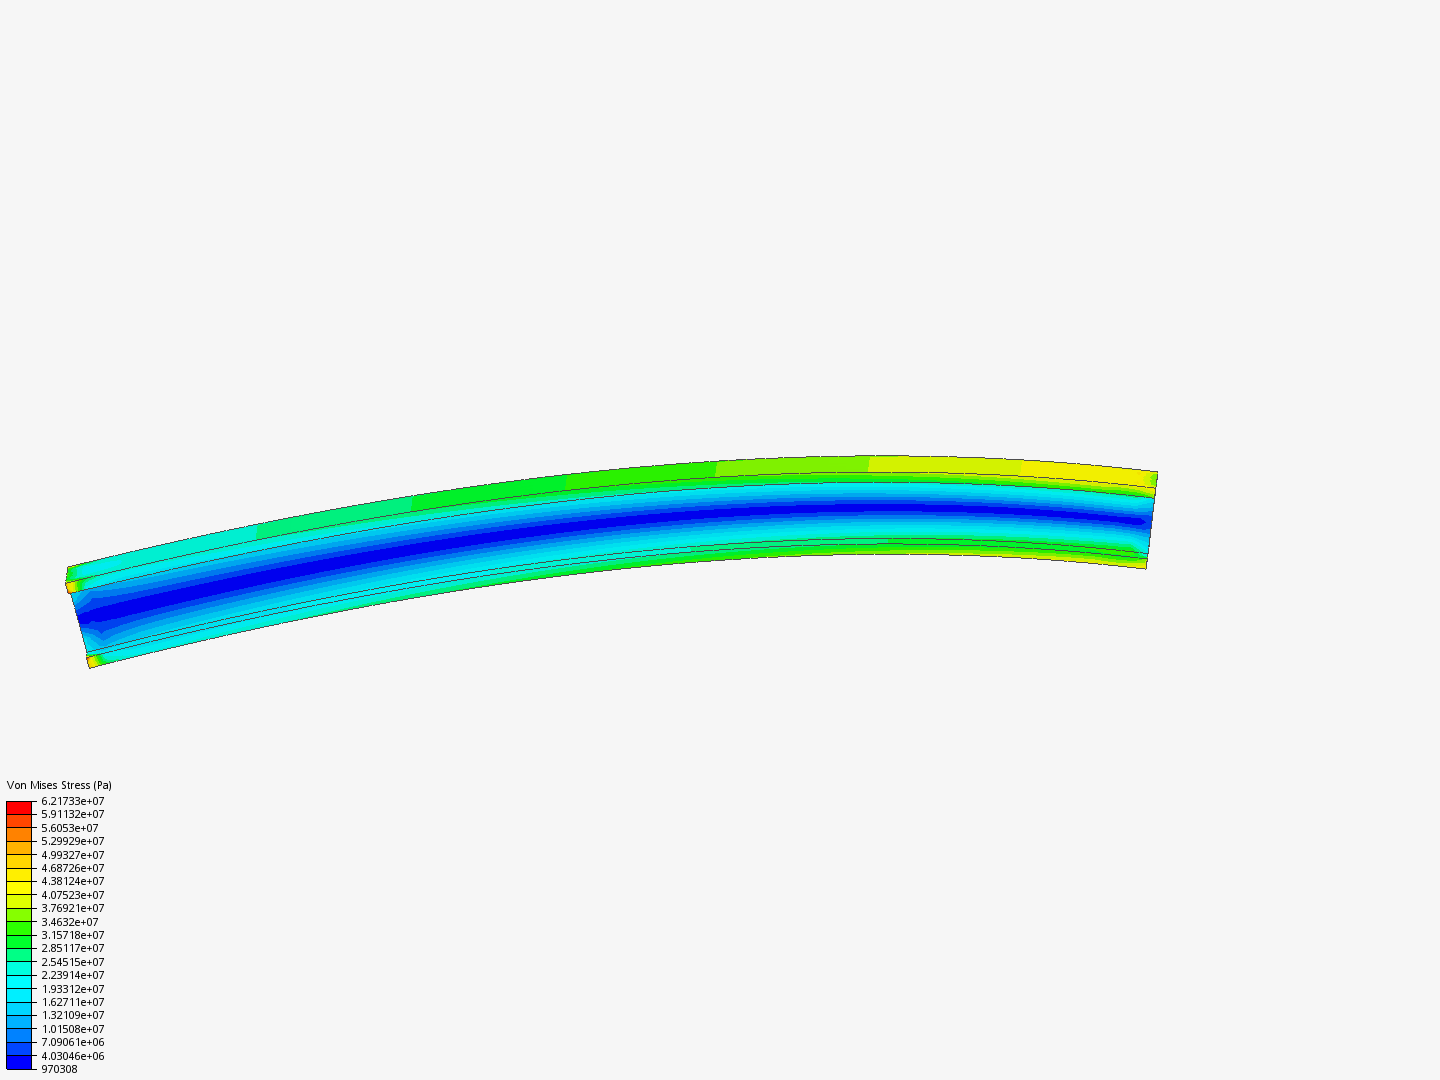 FEA Analysis of an I beam - Copy image